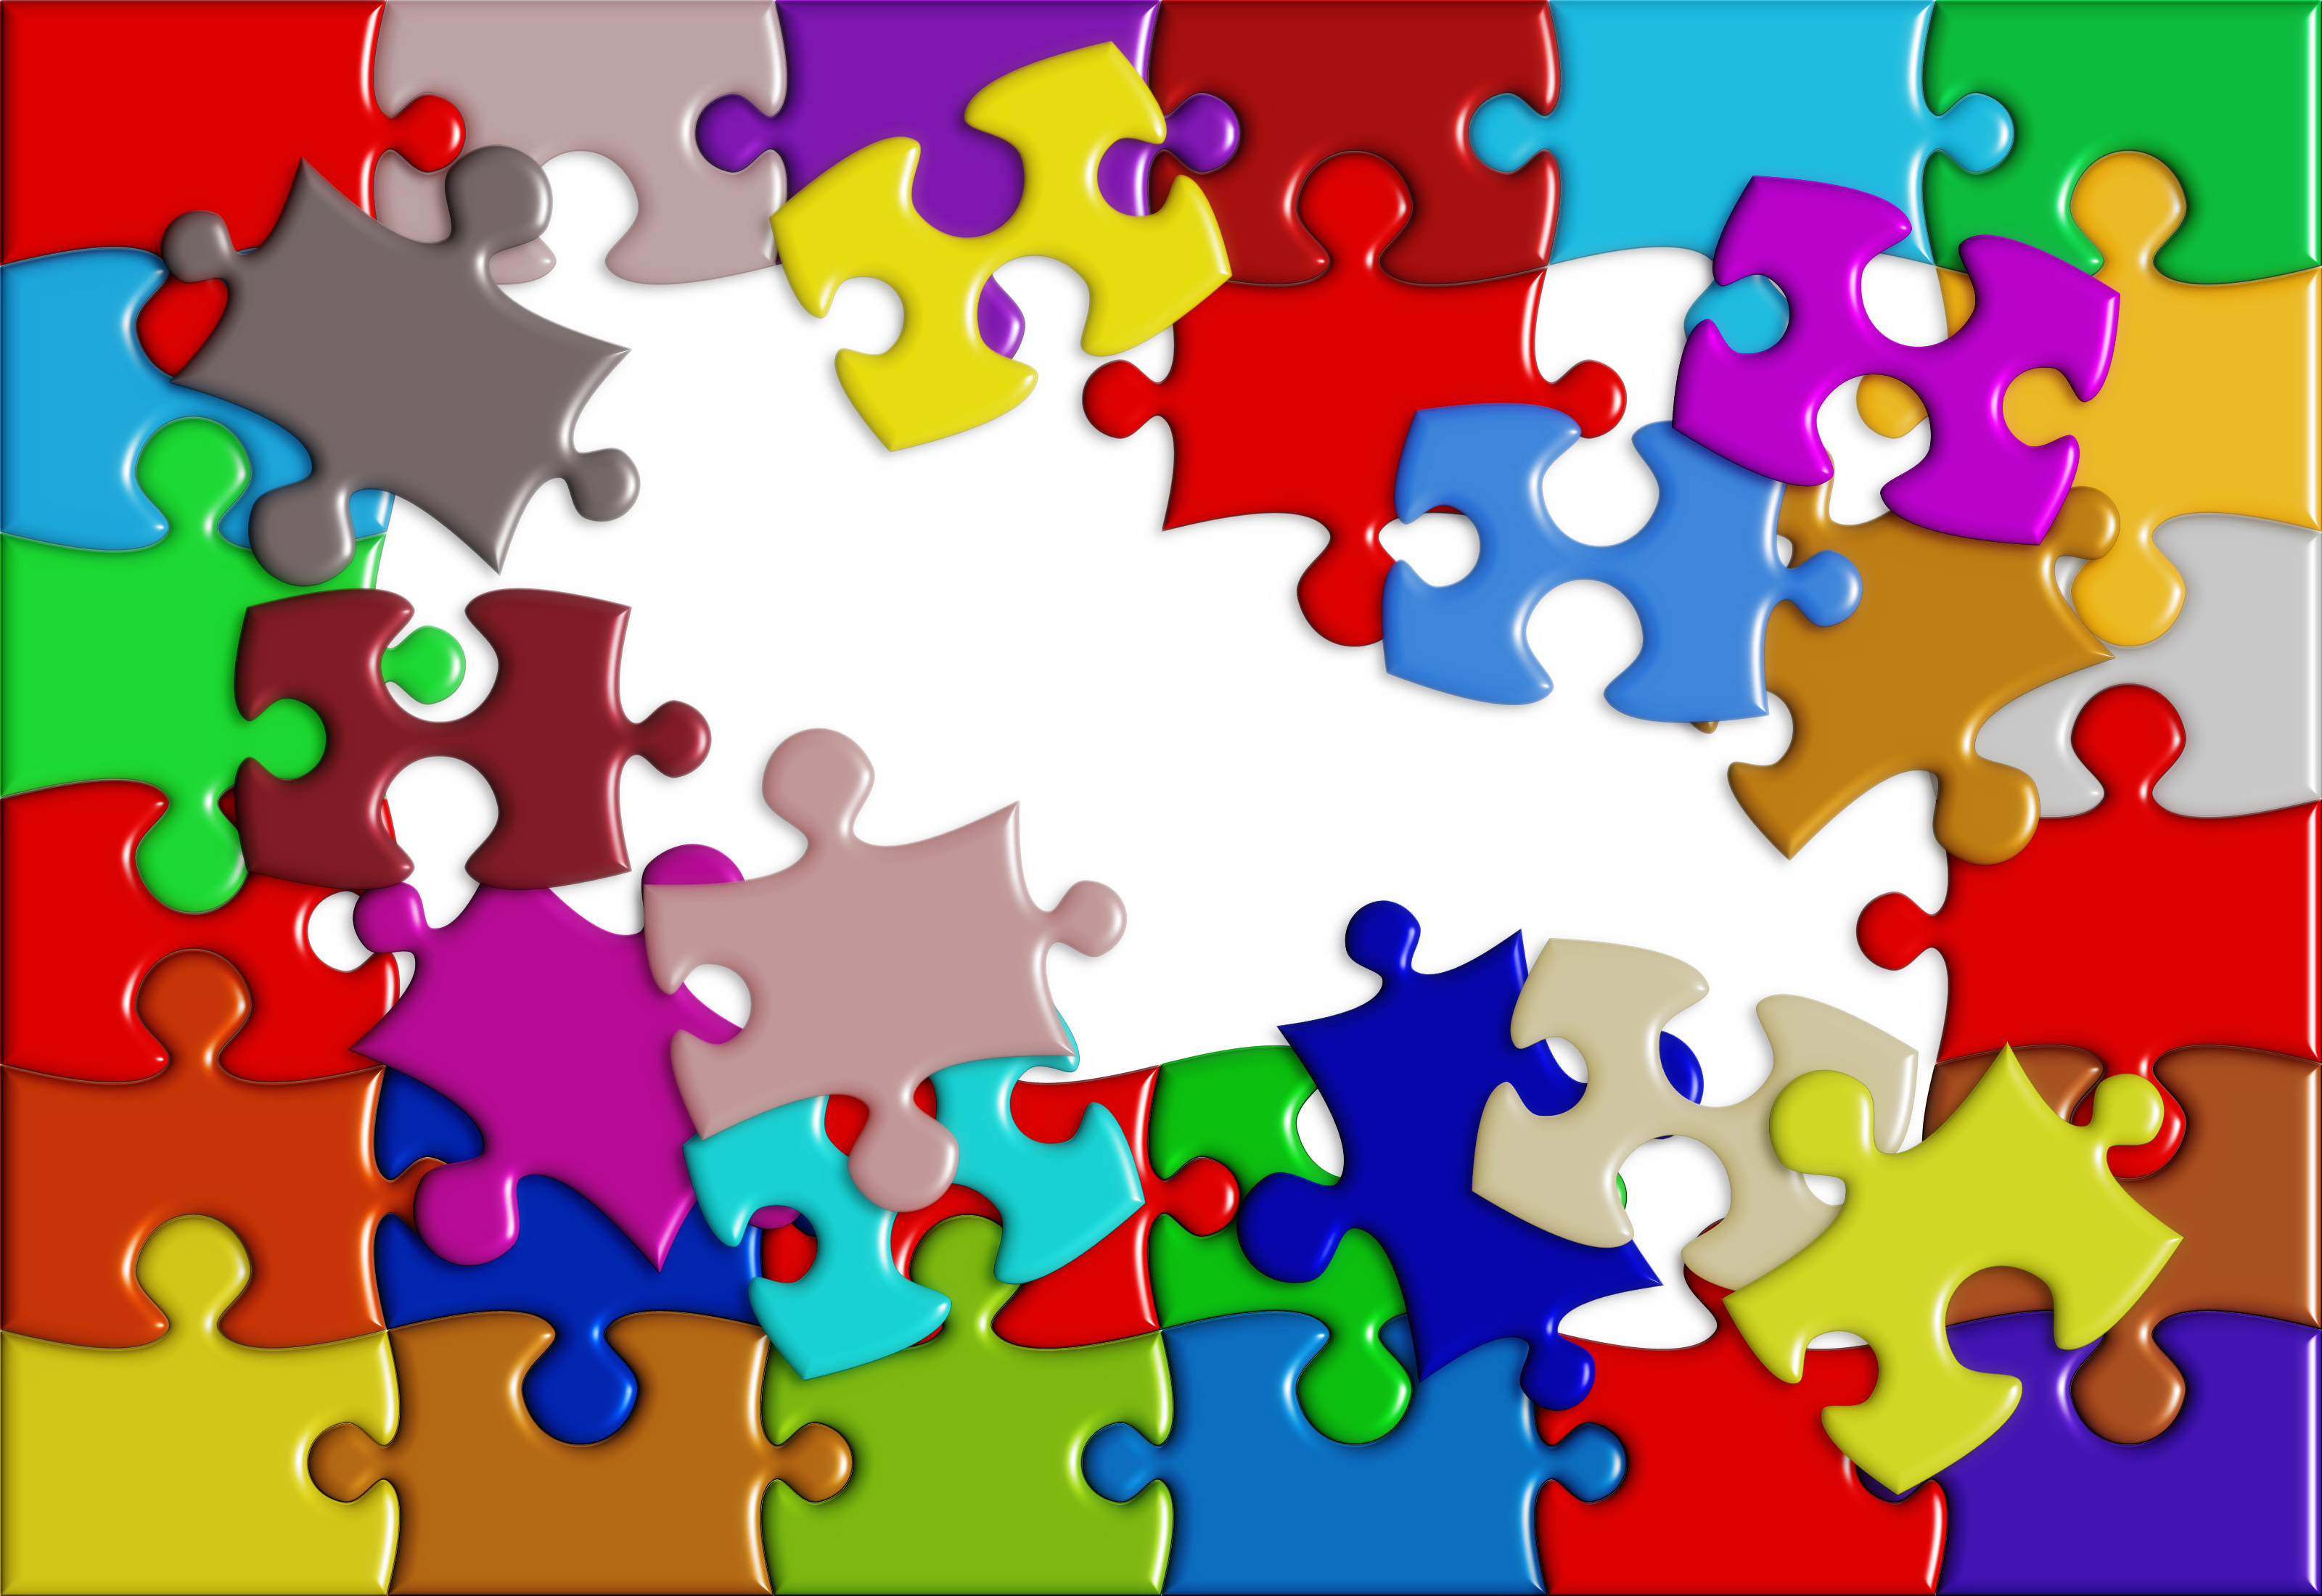 partly finished jigsaw puzzle with various colors